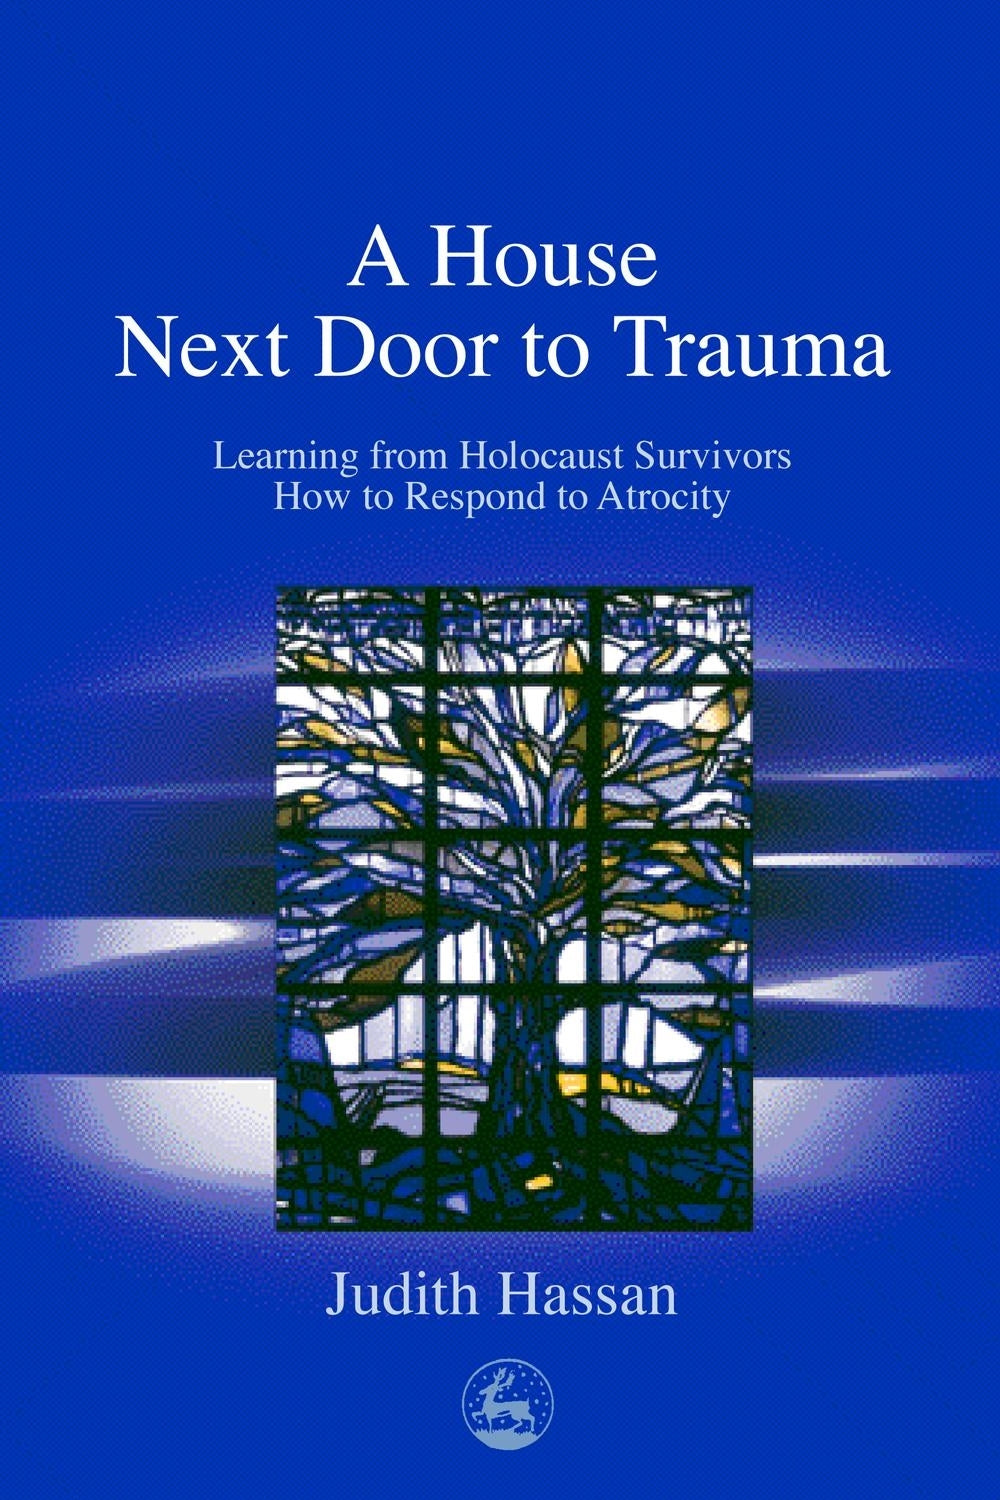 A House Next Door to Trauma by Judith Hassan